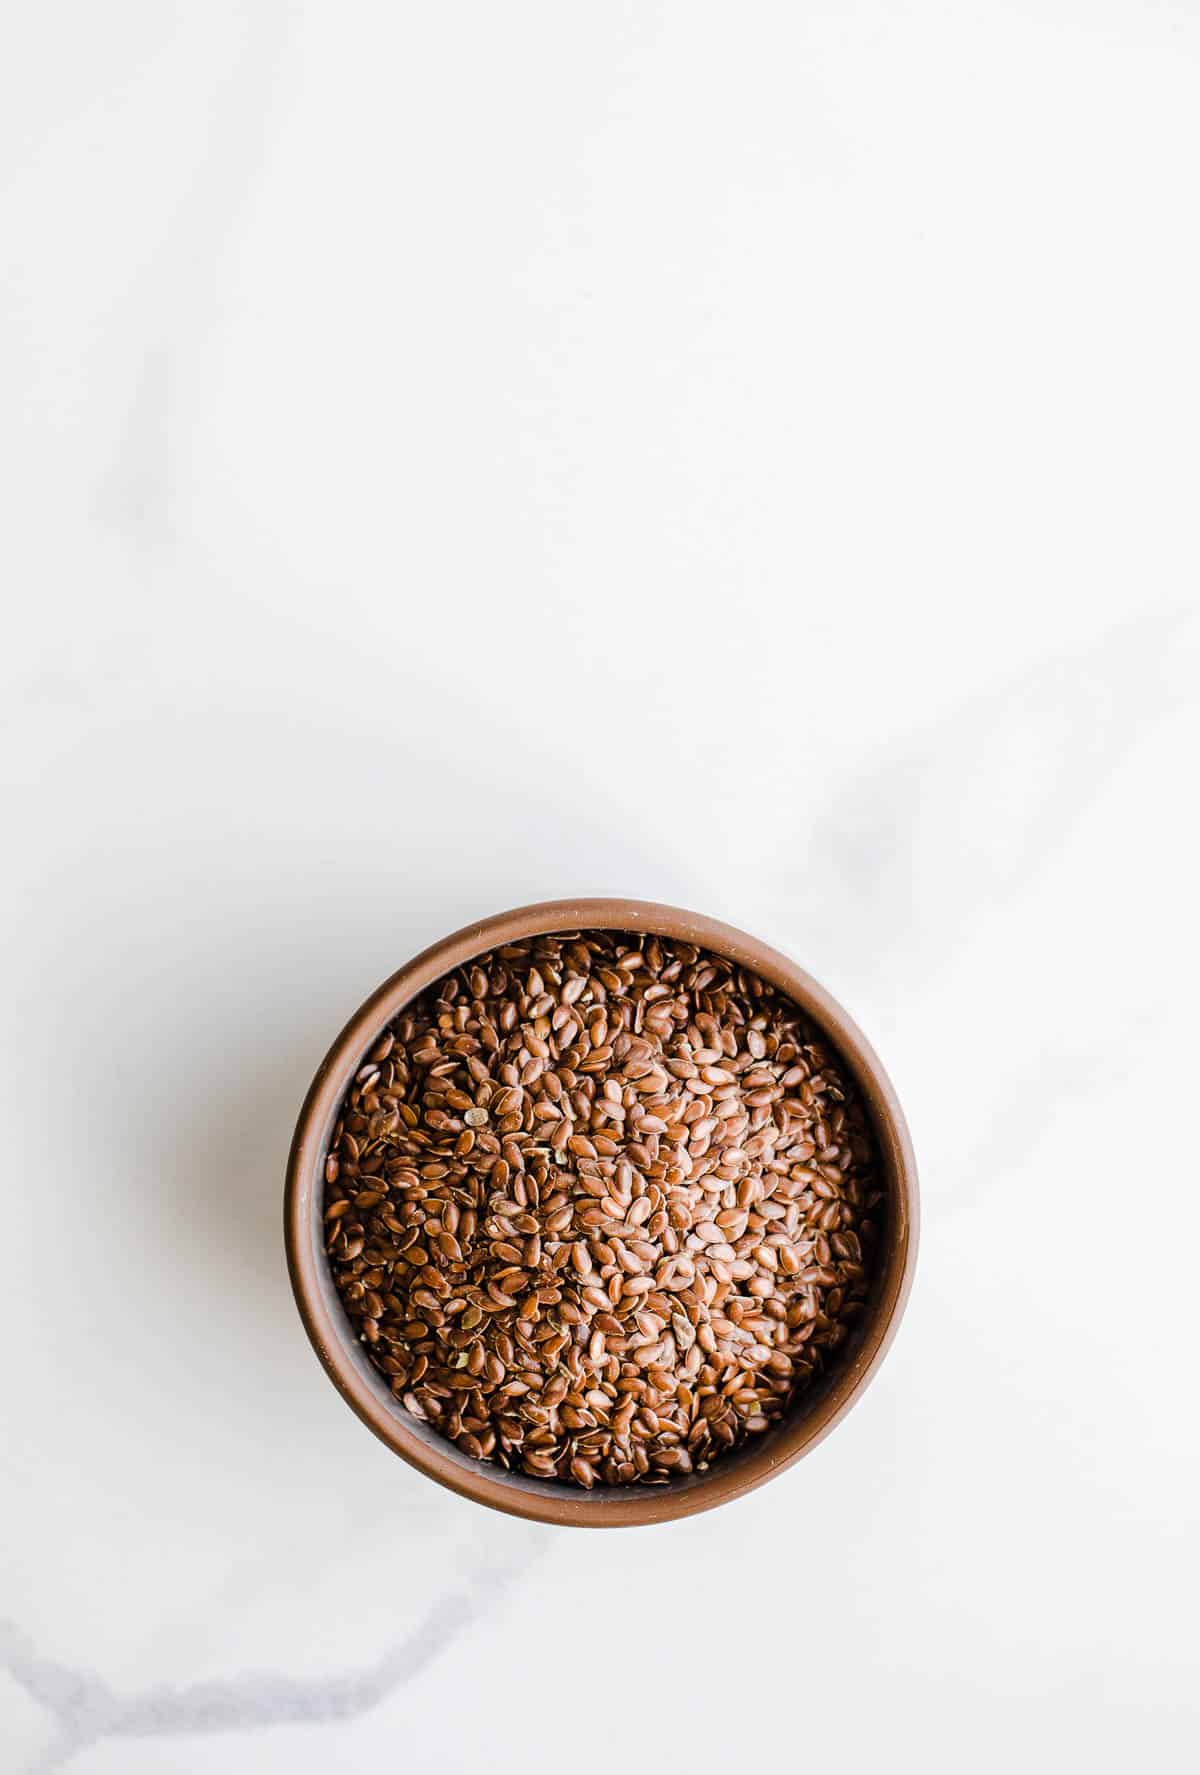 Flaxseed in a small bowl.